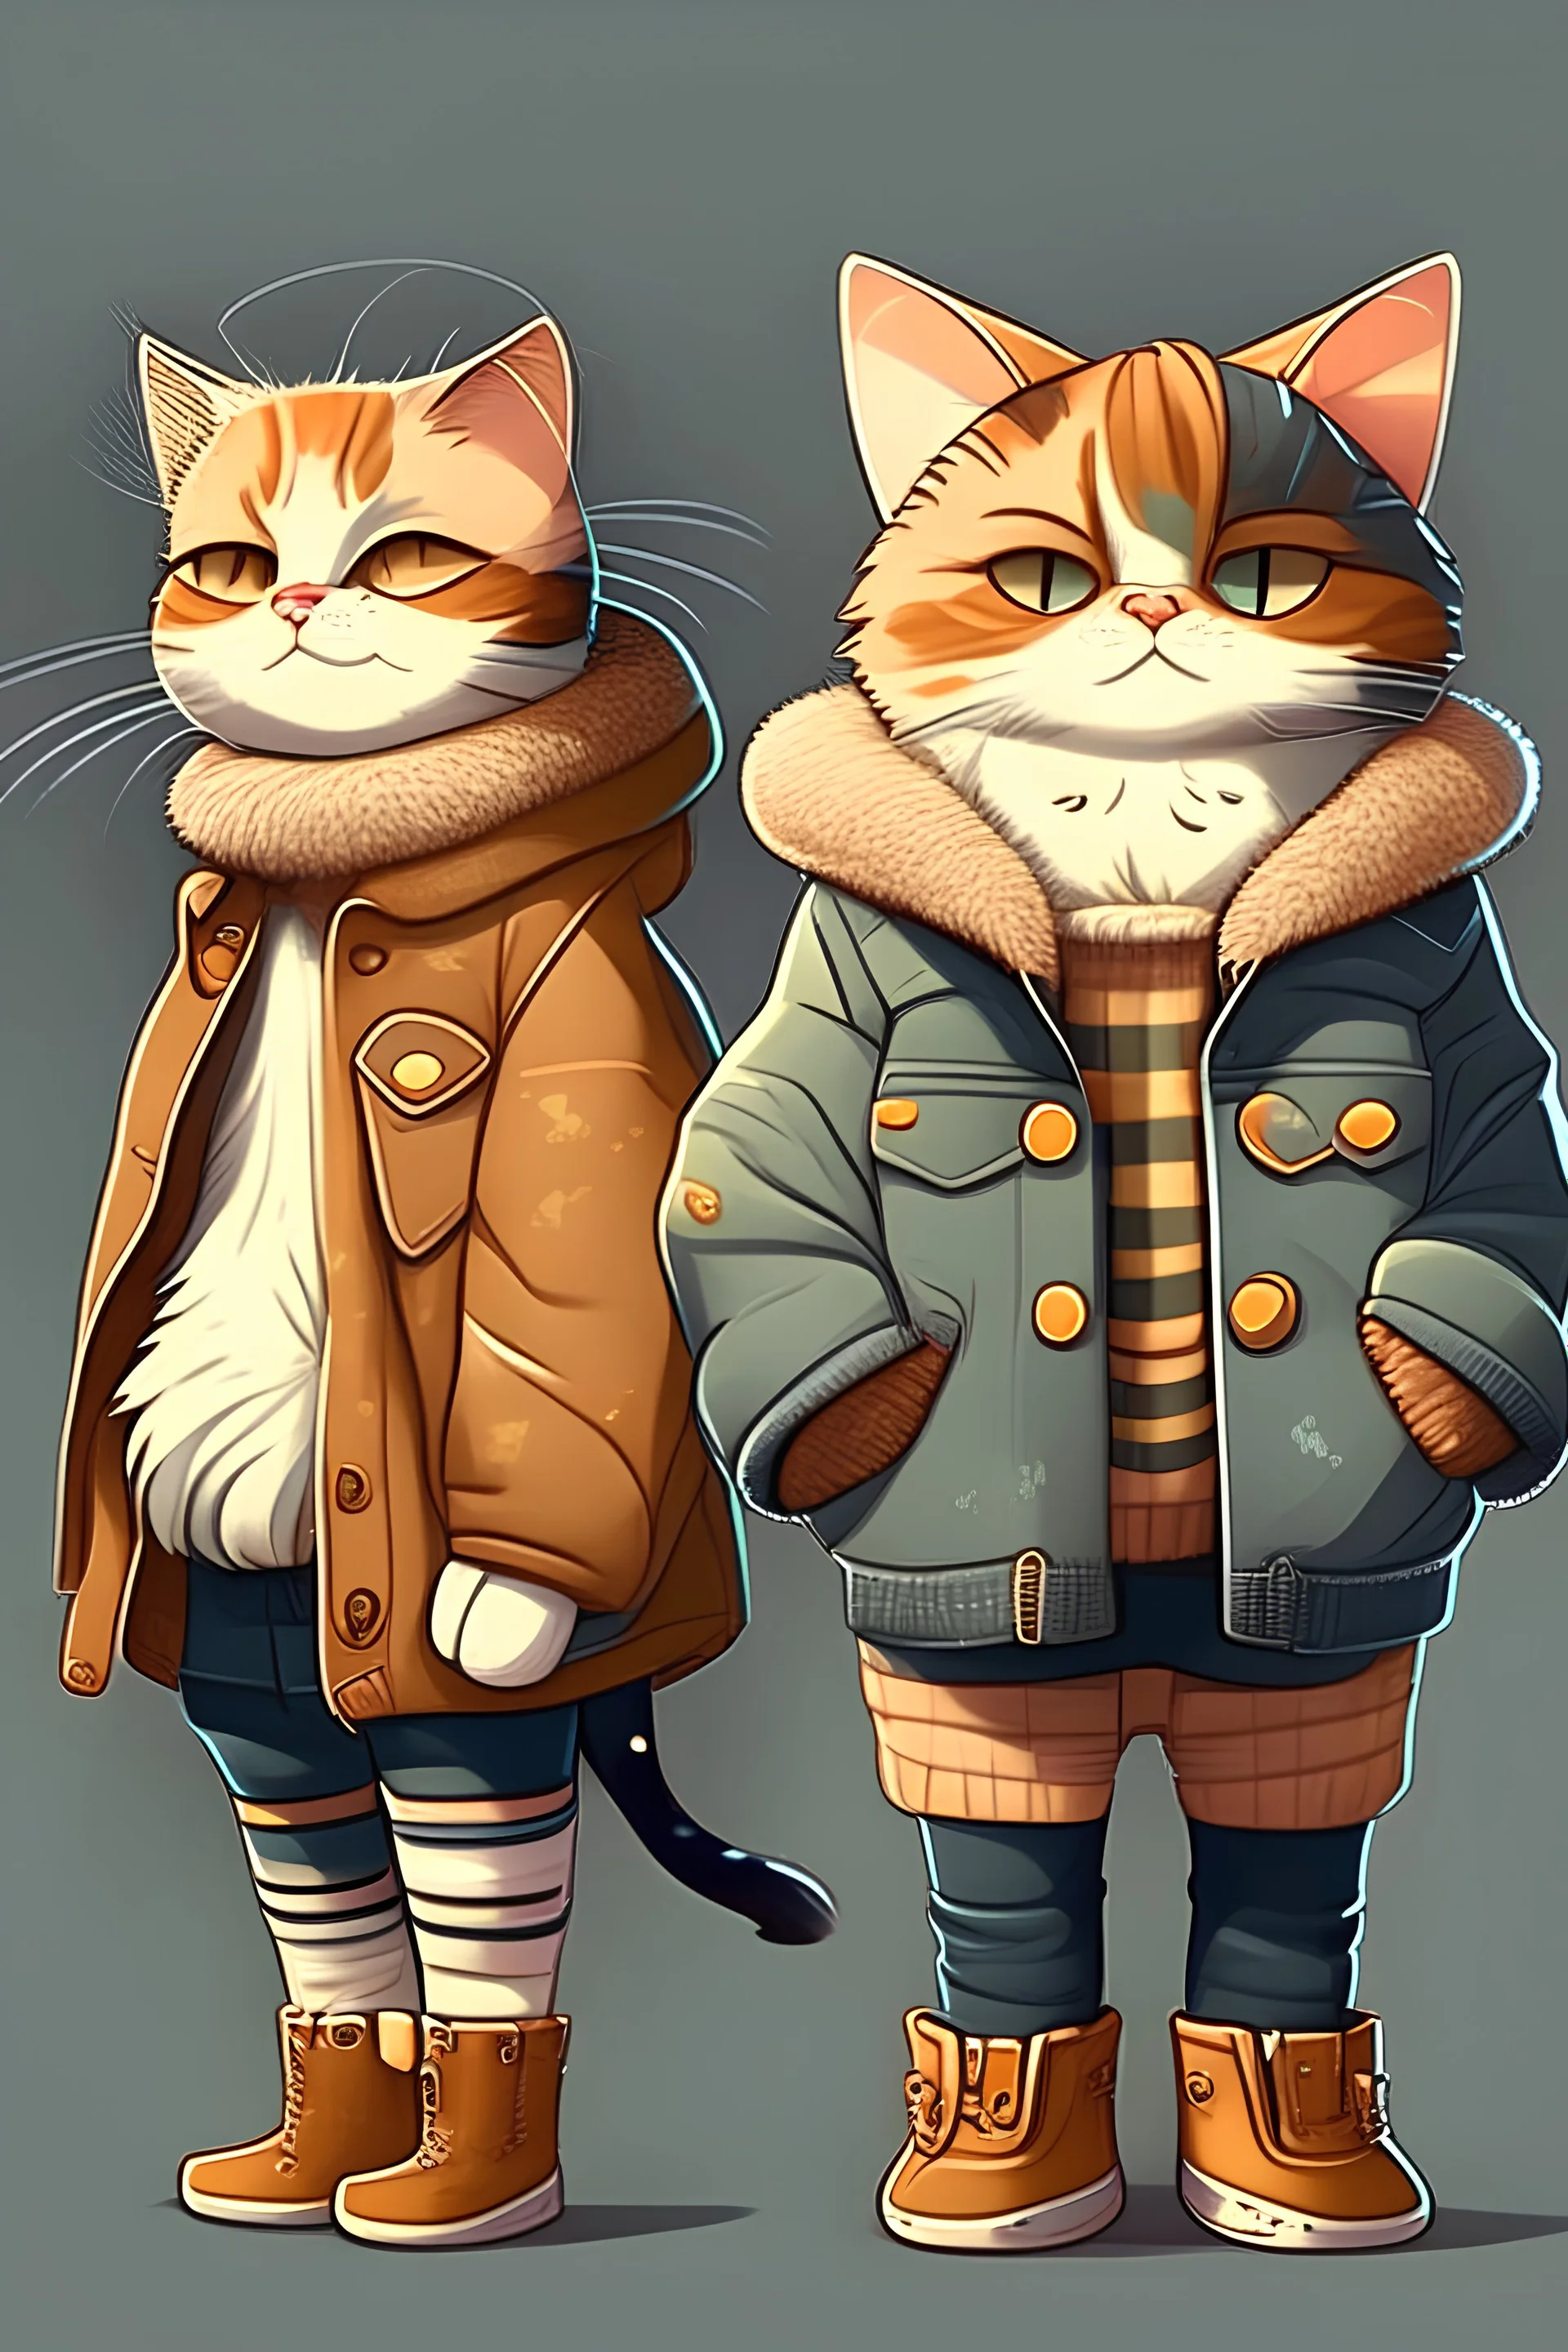 clothes with cat fur with cartoon style